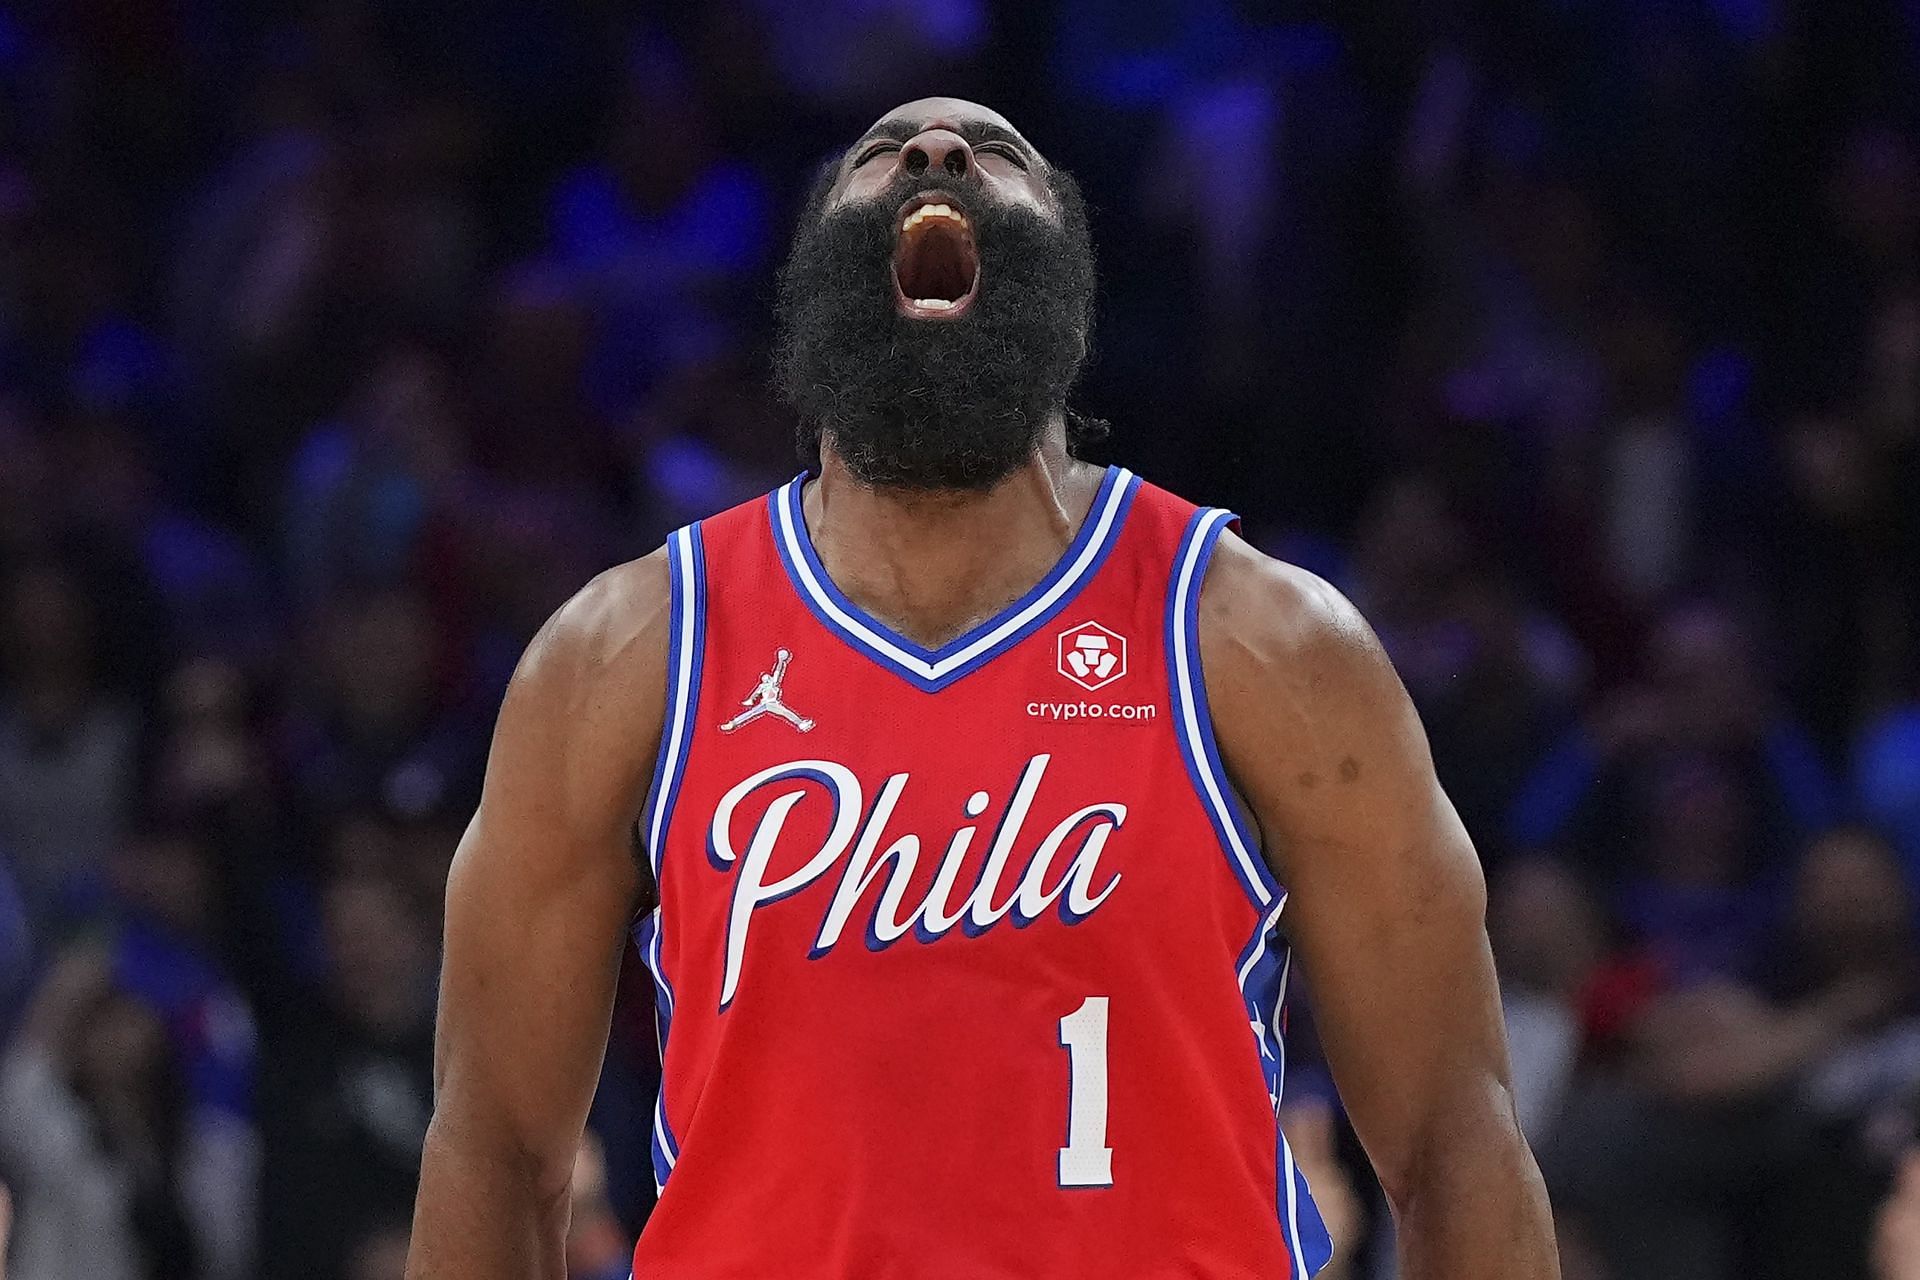 James Harden #1 of the Philadelphia 76ers reacts against the Miami Heat in the second half during Game Four of the 2022 NBA Playoffs Eastern Conference Semifinals at the Wells Fargo Center on May 8, 2022 in Philadelphia, Pennsylvania. The 76ers defeated the Heat 116-108.